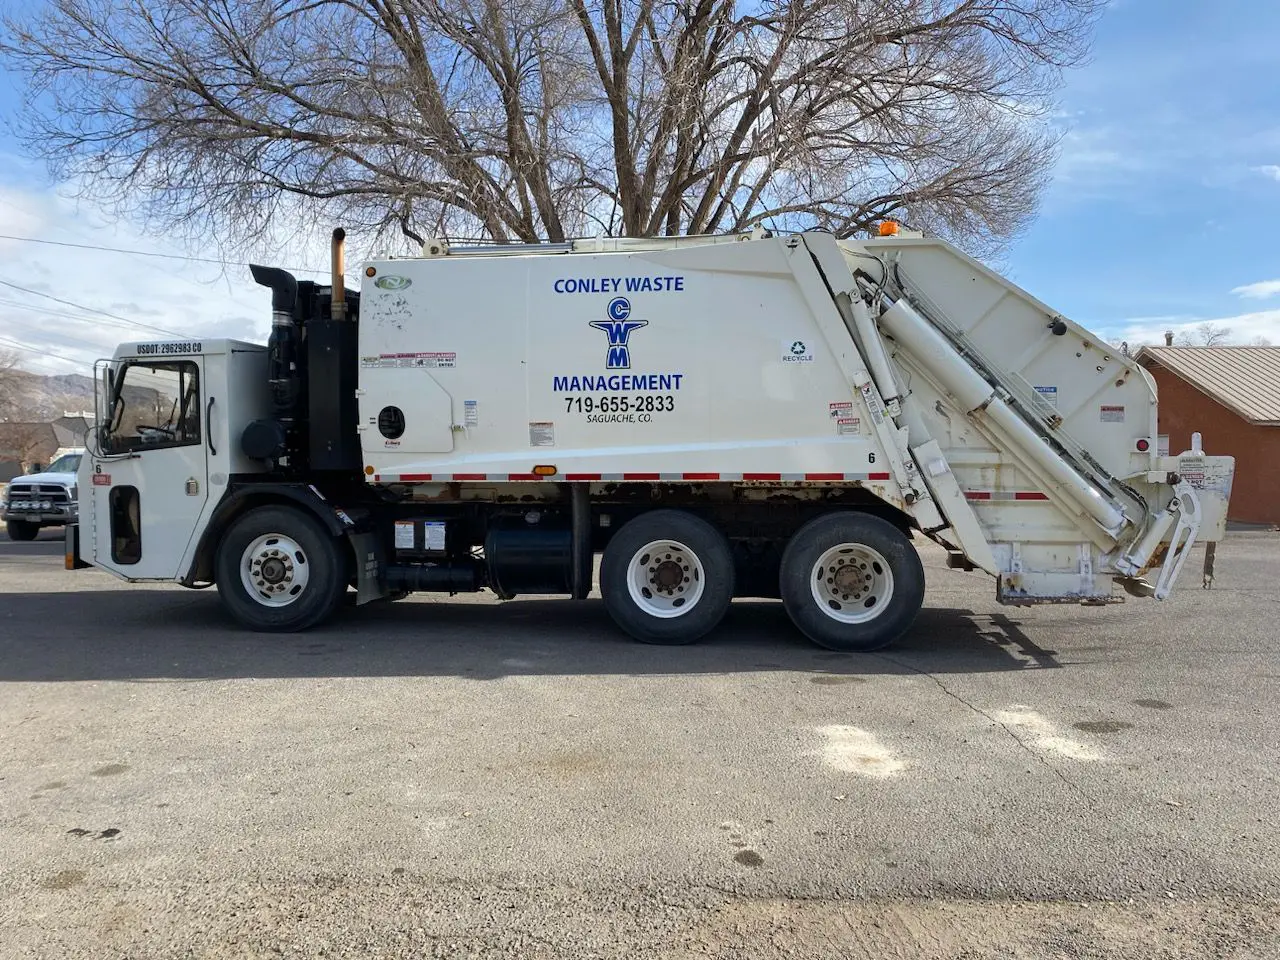 A garbage truck parked in the middle of a parking lot.